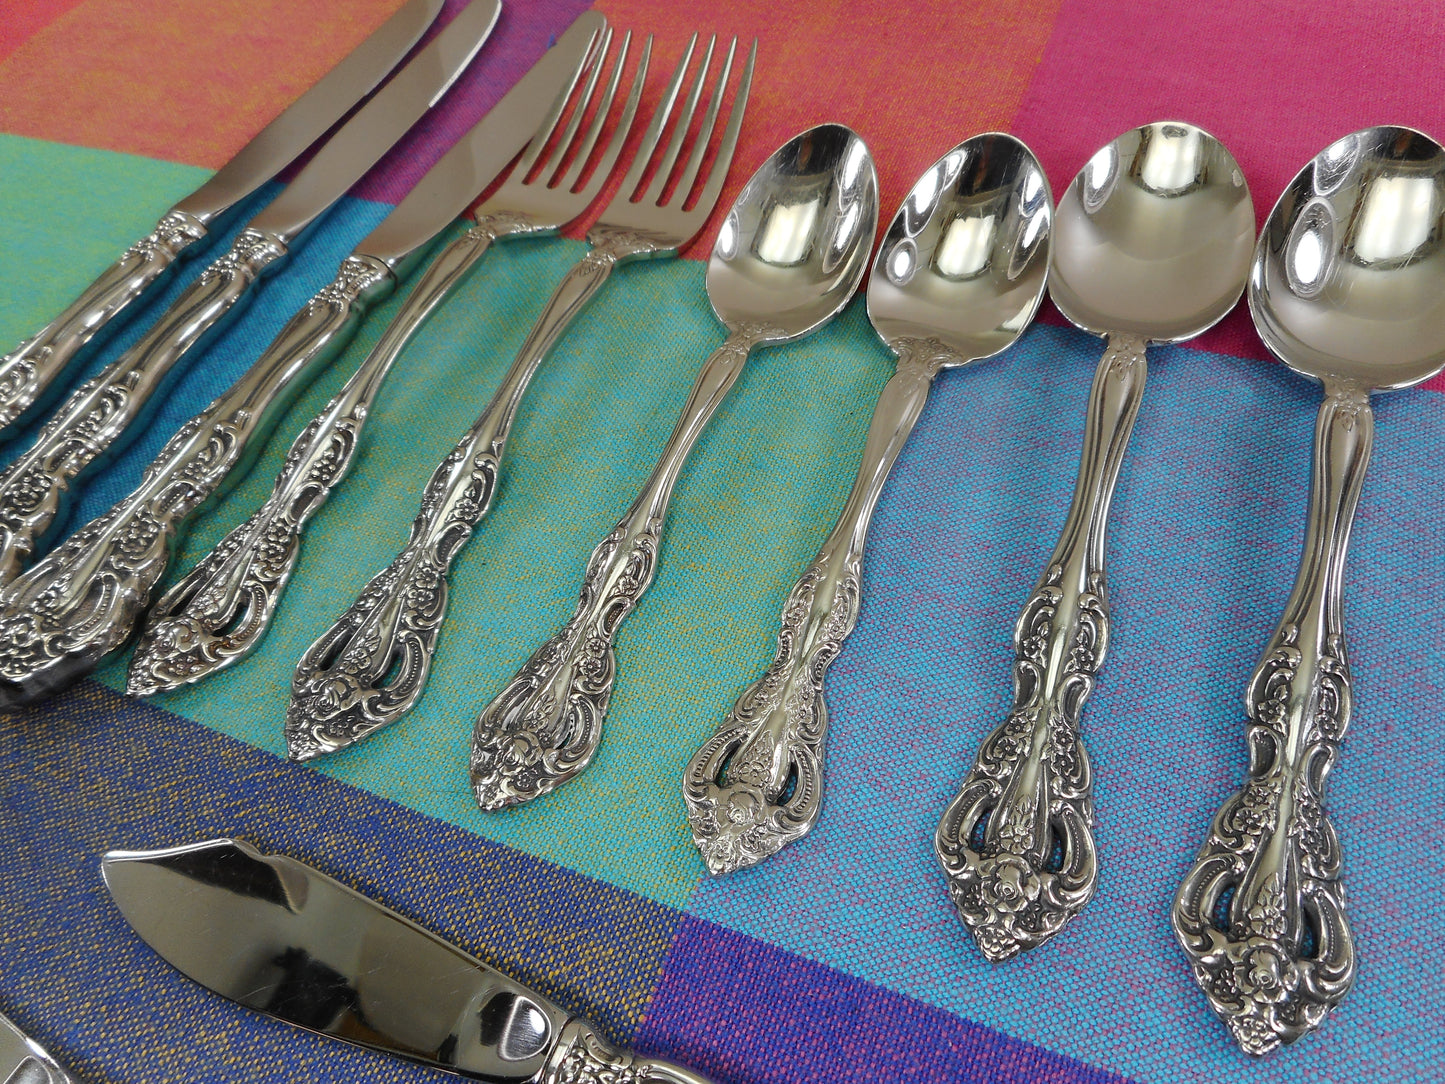 Oneida USA Michelangelo Stainless Flatware - 11 Pieces Teaspoon Place Spoon Fork Knives Used